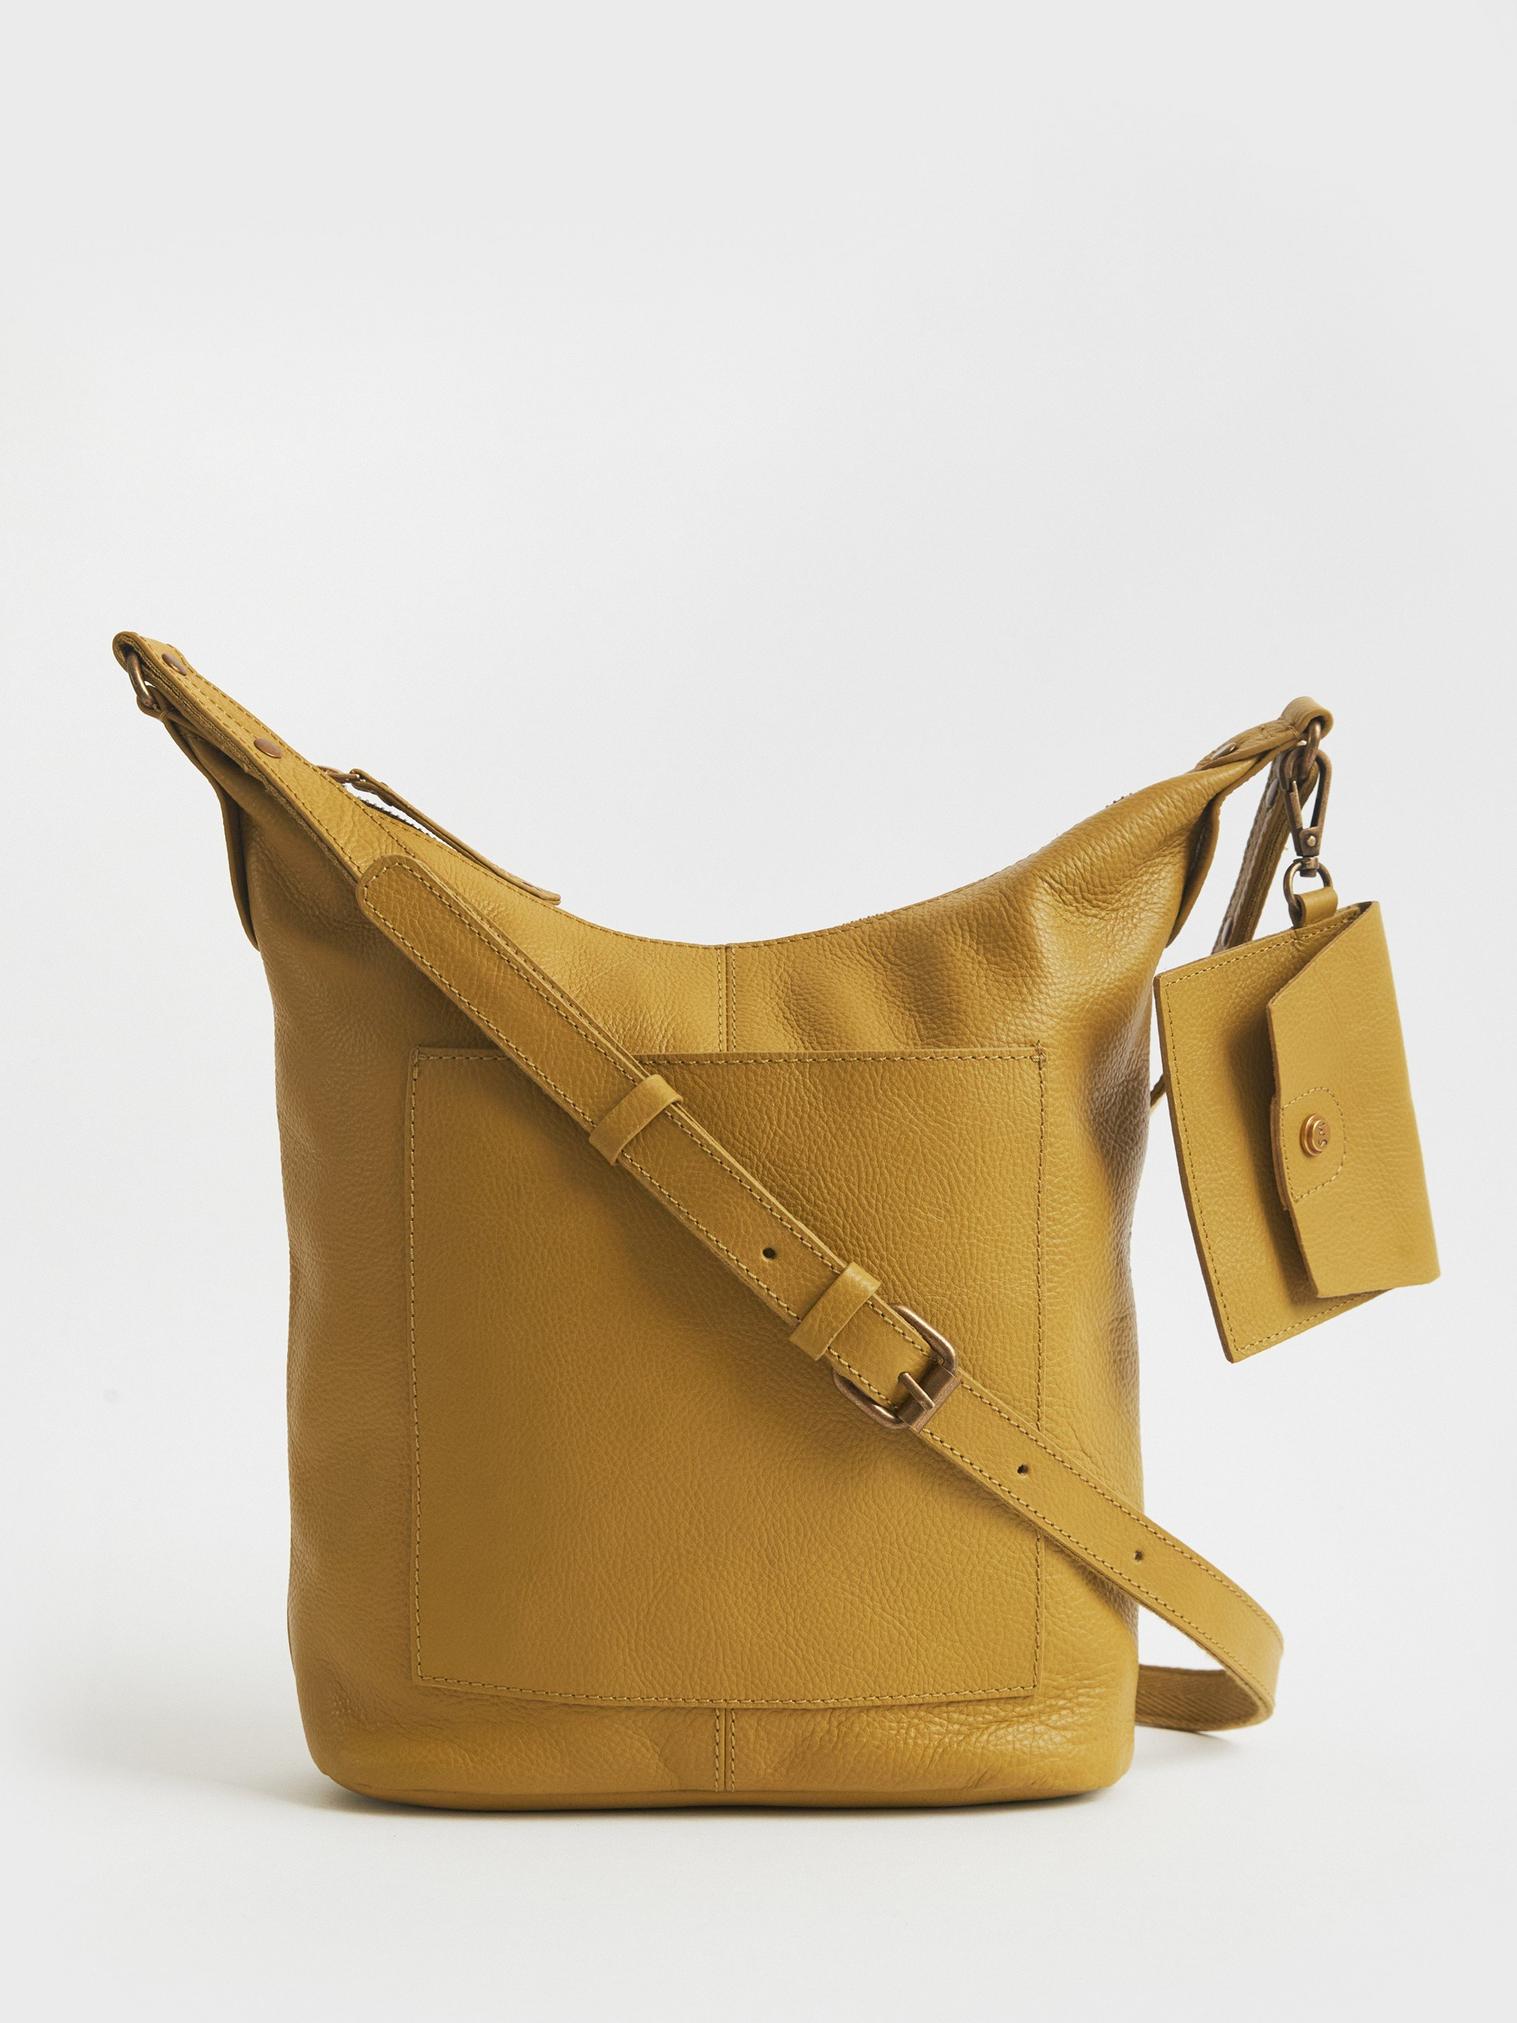 Fern Leather Crossbody in MID CHART - FLAT FRONT